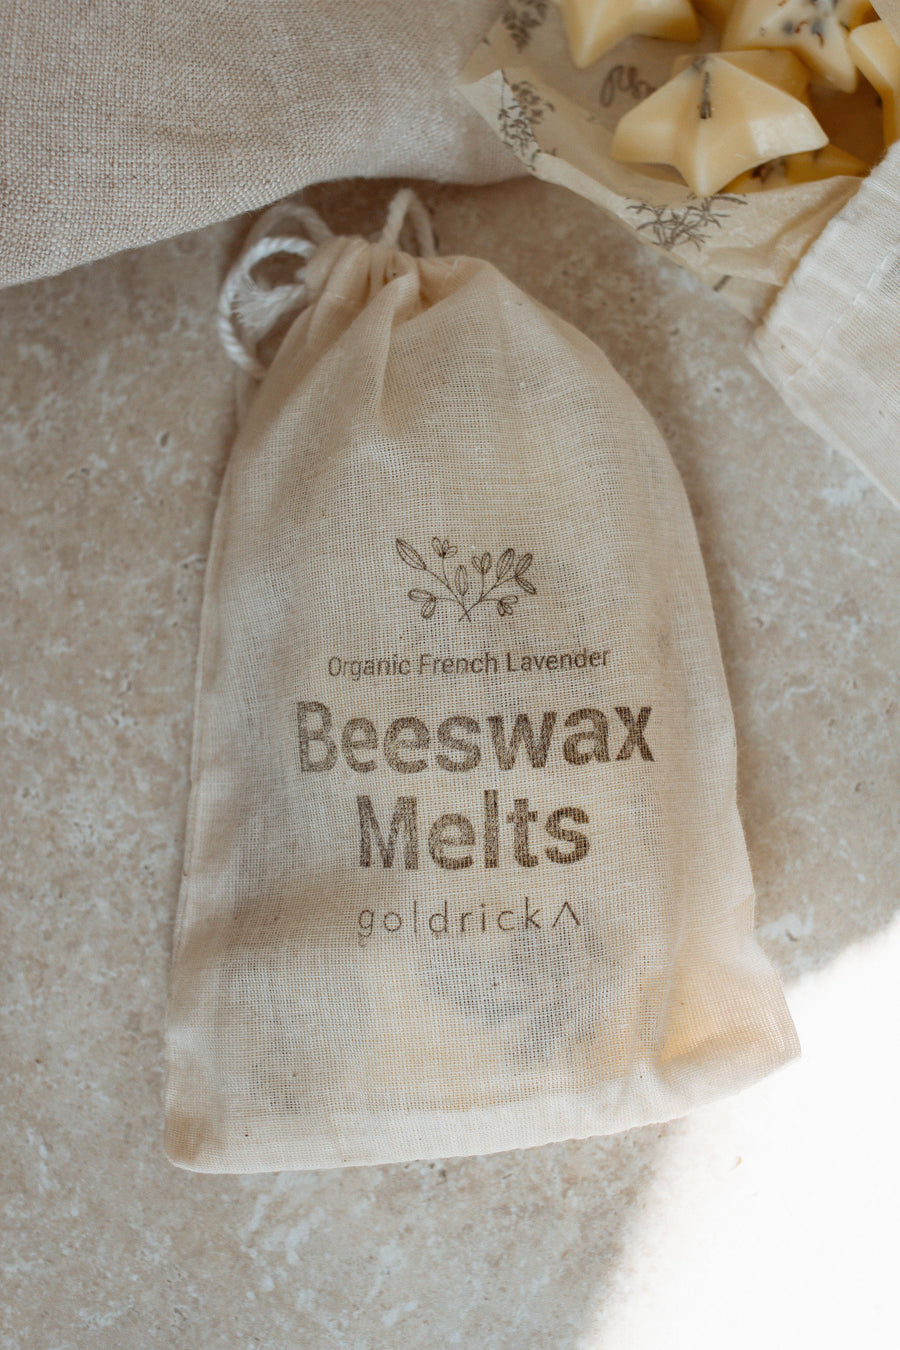 Lavender Beeswax Melts